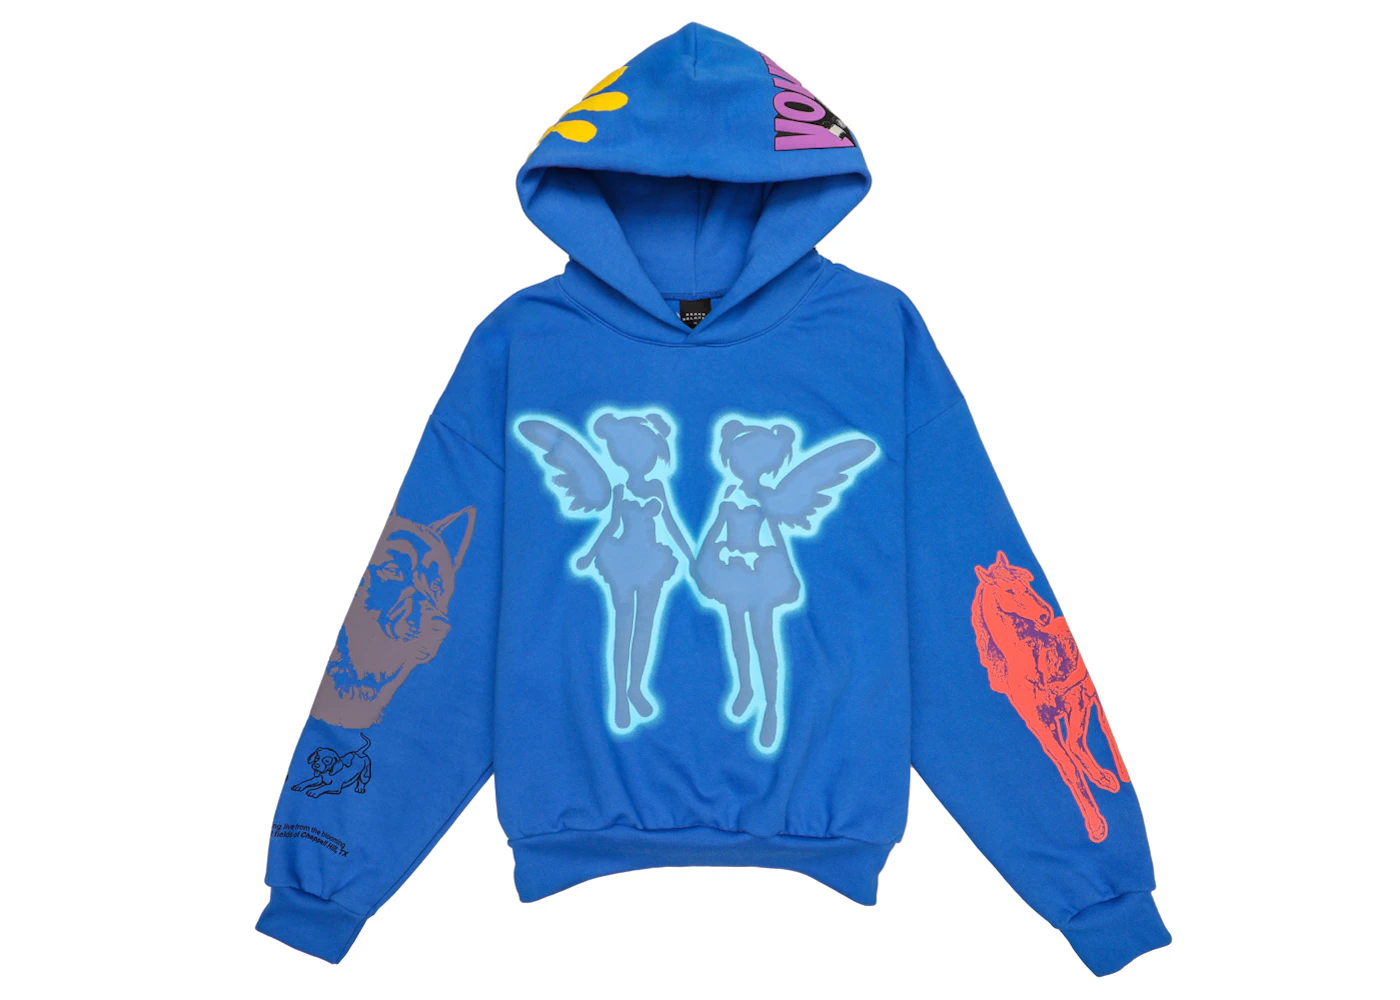 https://images.stockx.com/images/Drake-FATD-For-All-The-Dogs-Hoodie-Blue-Product.jpg?fit=fill&bg=FFFFFF&w=700&h=500&fm=webp&auto=compress&q=90&dpr=2&trim=color&updated_at=1709567241